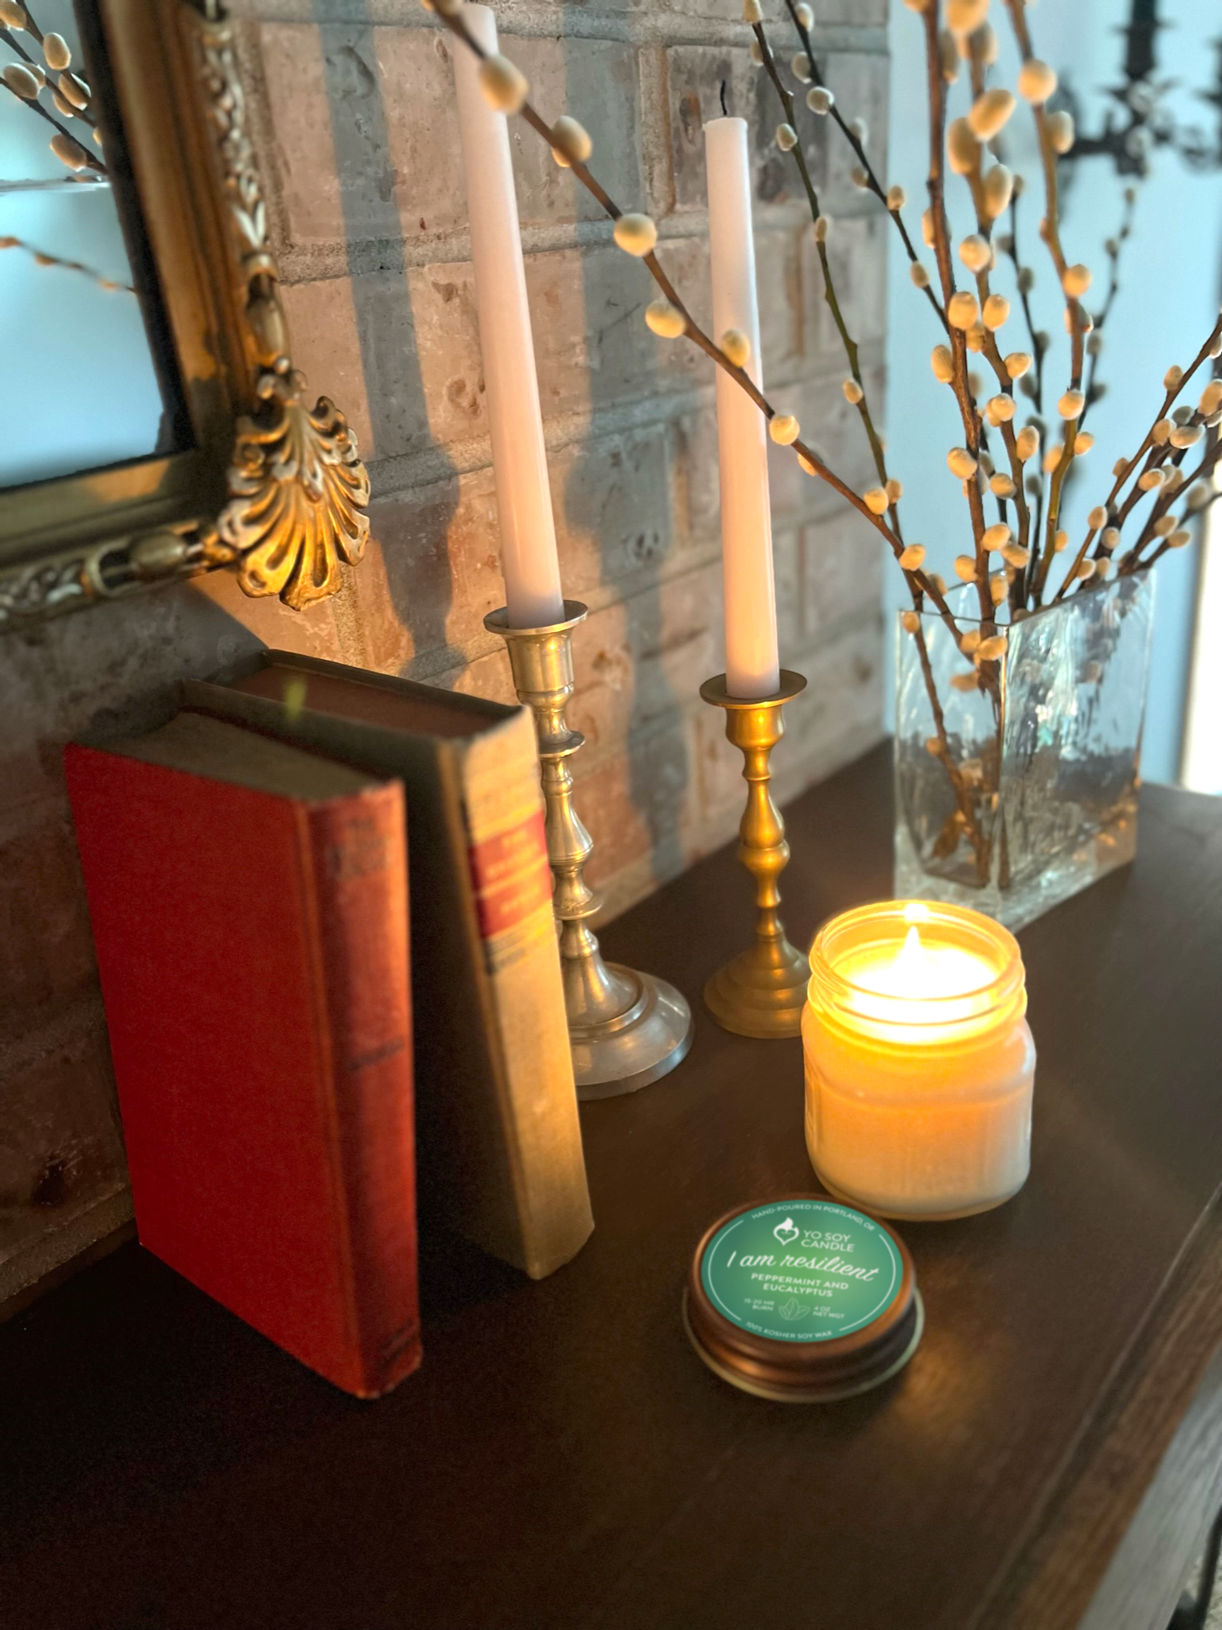 I Am Resilient : Peppermint and Eucalyptus Soy Candle